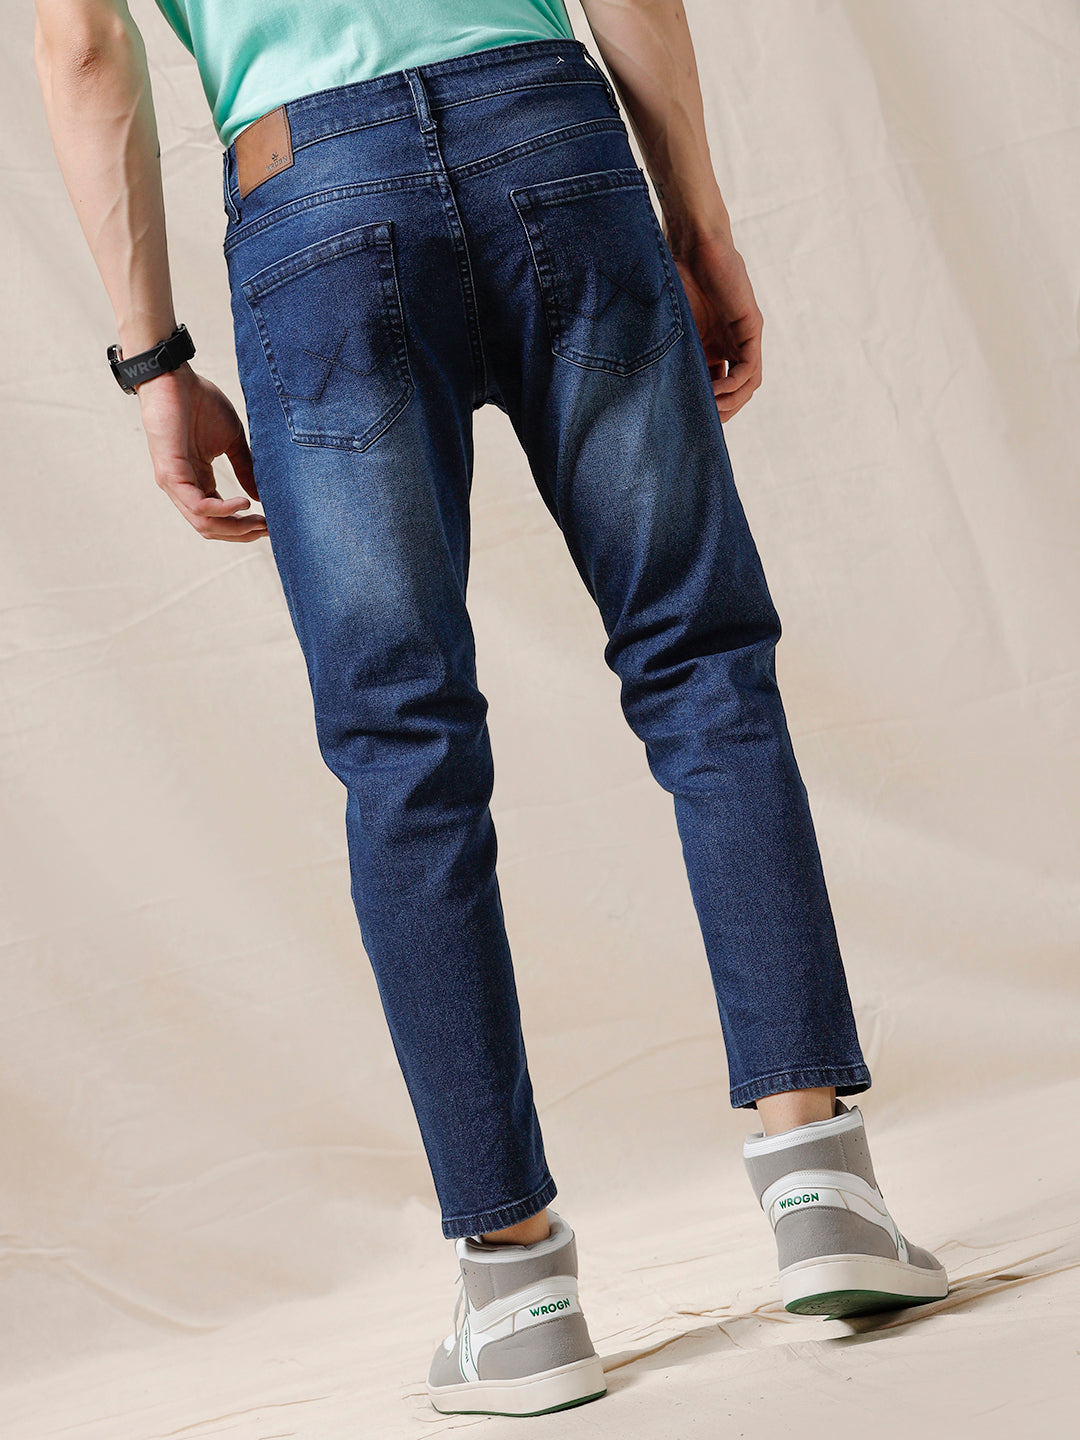 Urban Trend Faded Jeans